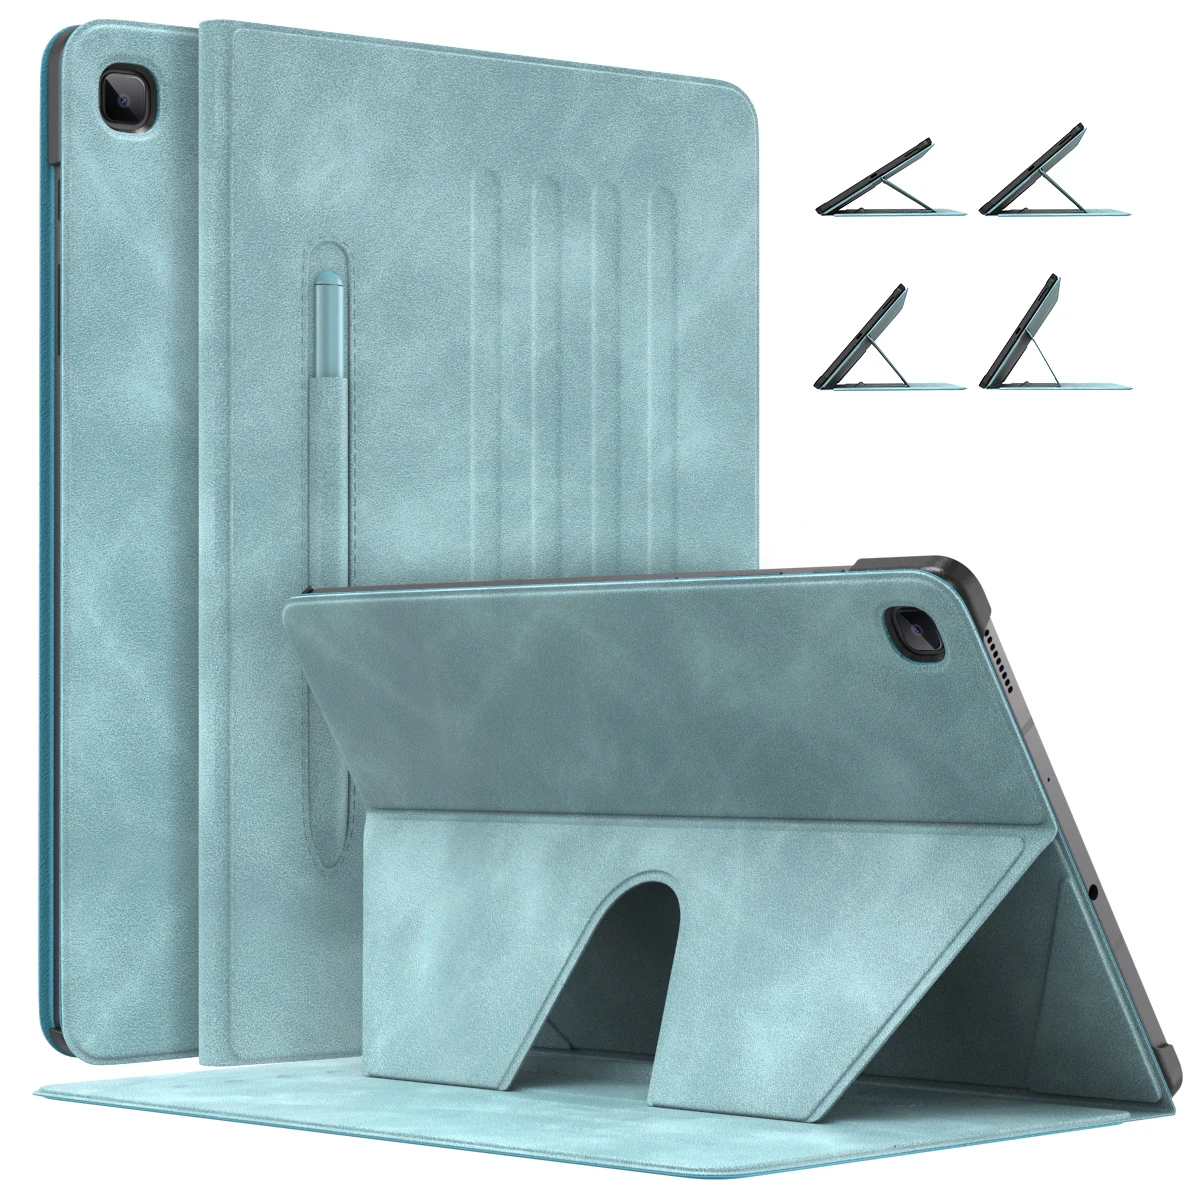 Big Deal Tablet Case Smart-Cover Galaxy Tab S6 Lite Slim for with Auto-Wake/sleep--Pen-Holder zOK0569qK